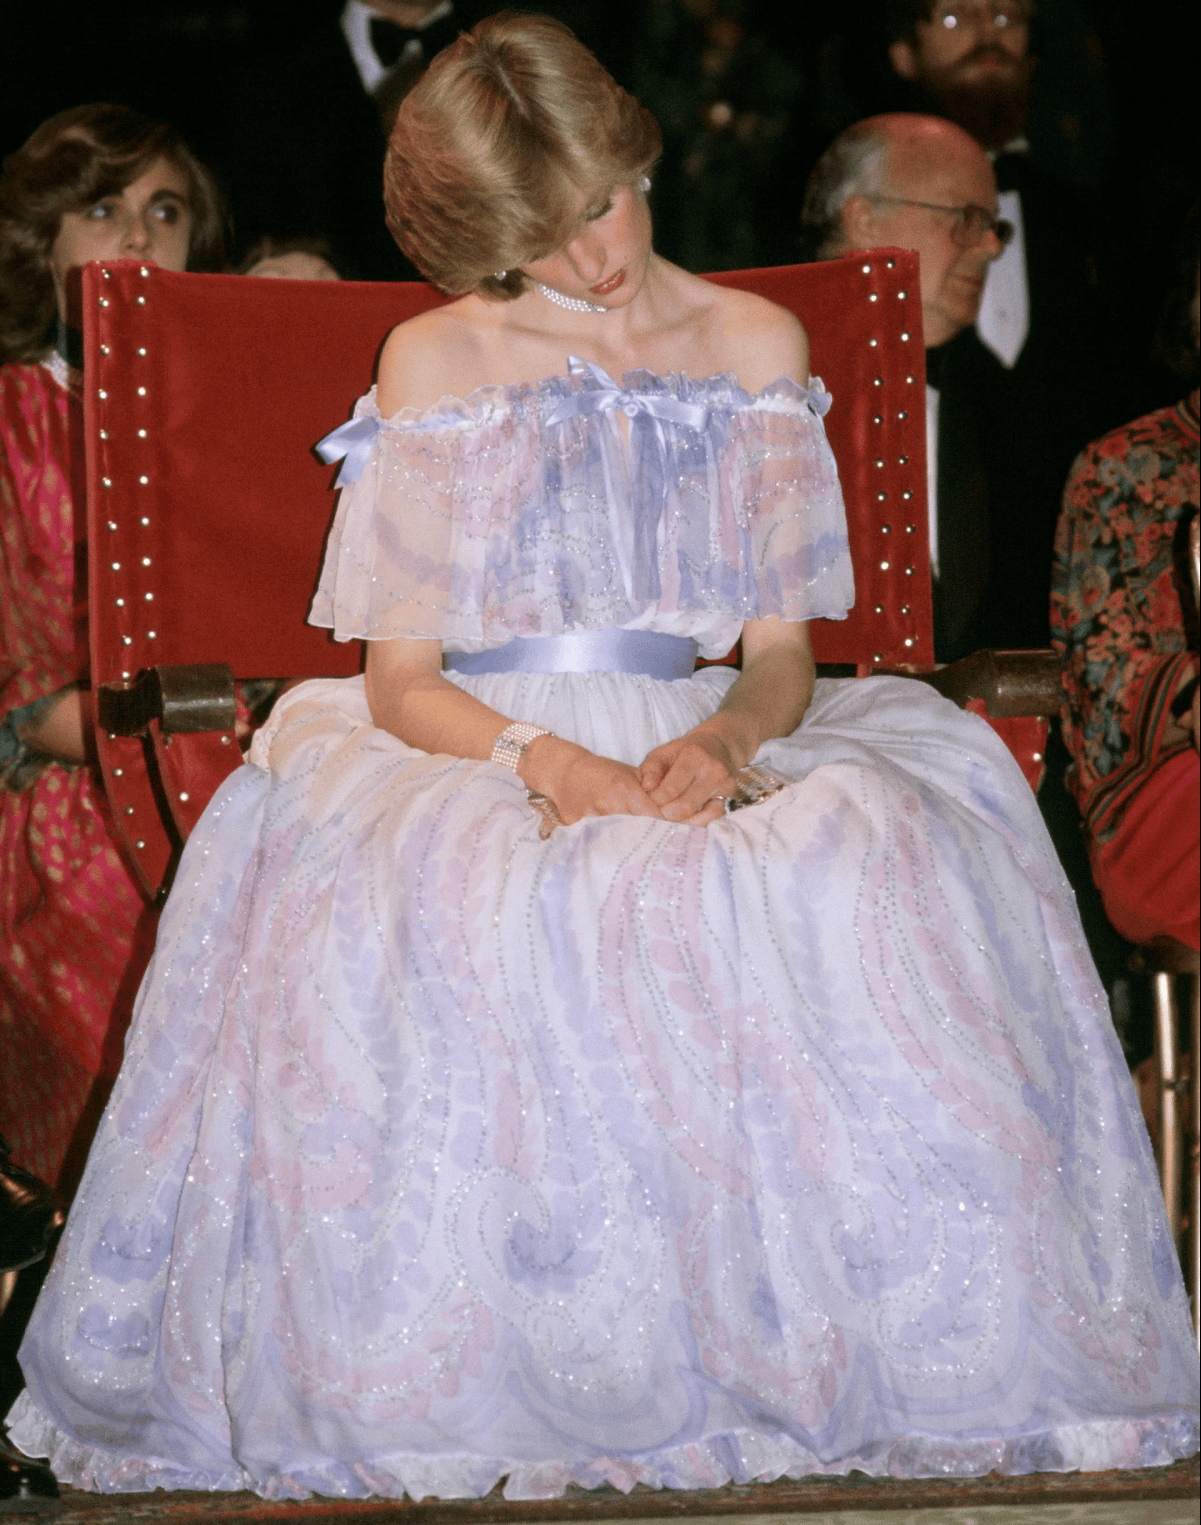  In this snapshot taken during a party at the Victoria and Albert Museum in November 1981, Diana Spencer is a modern-day Sleeping Beauty